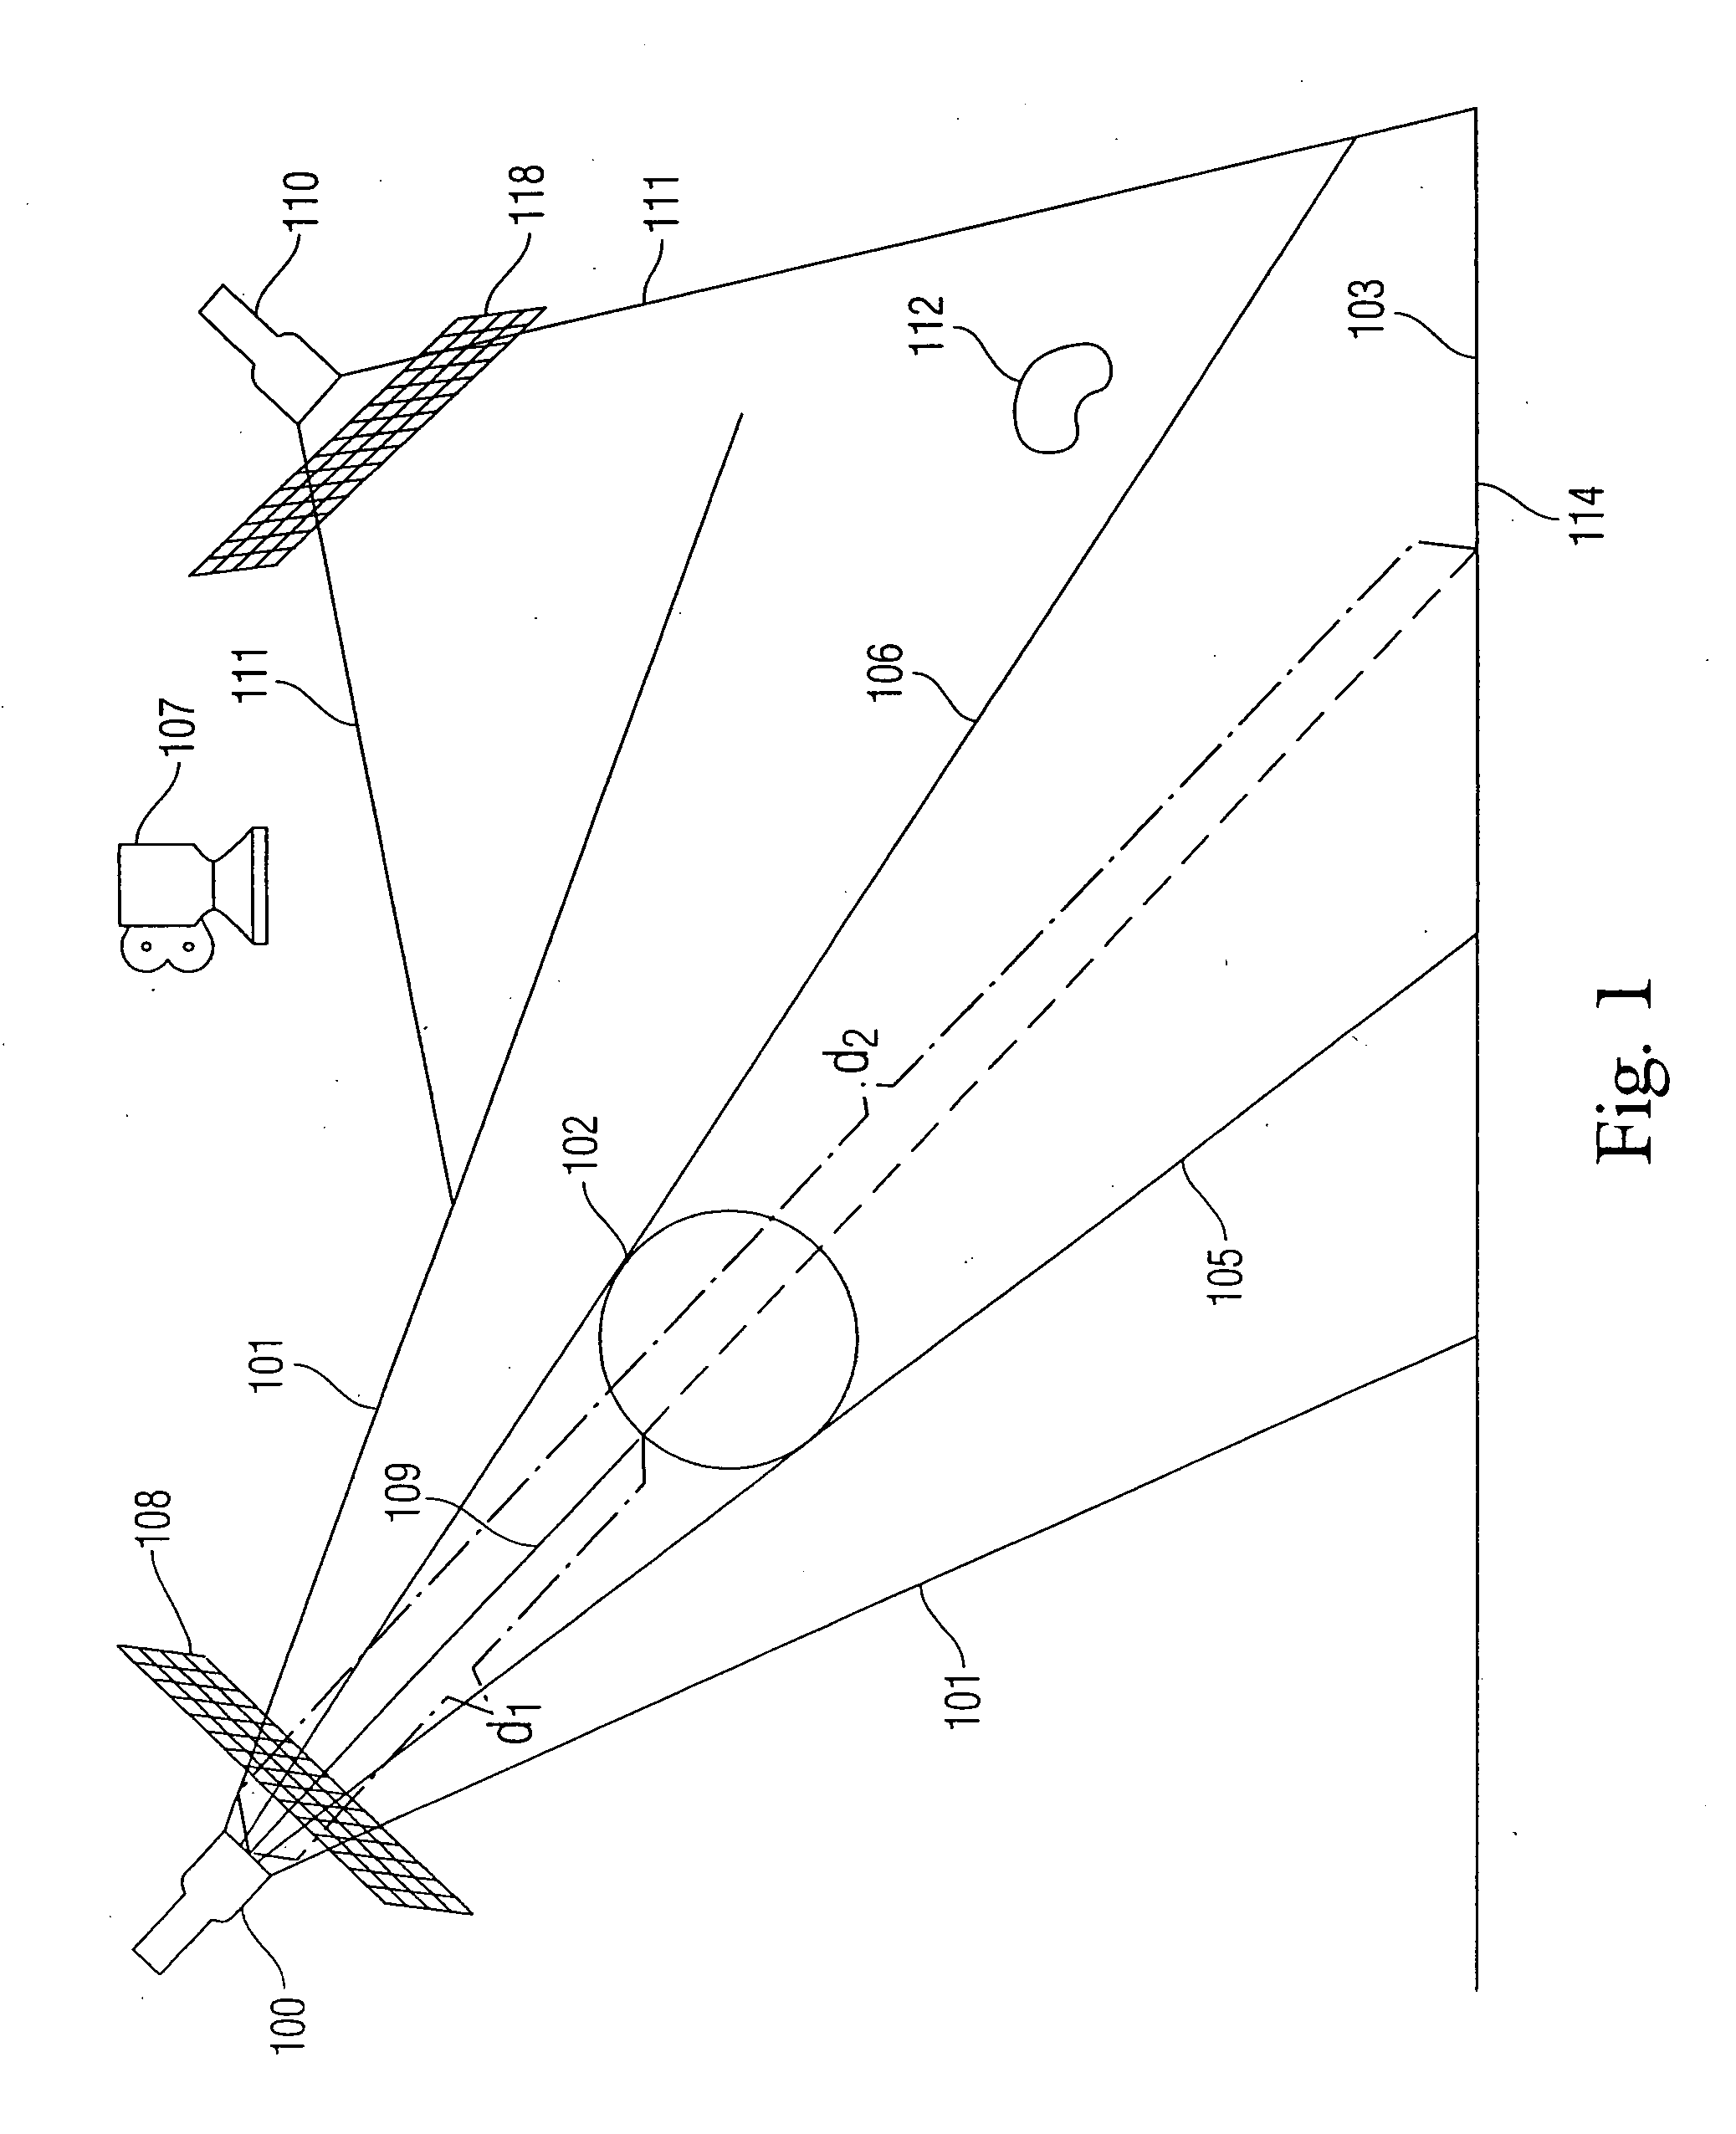 System and method for rendering computer graphics utilizing a shadow illuminator